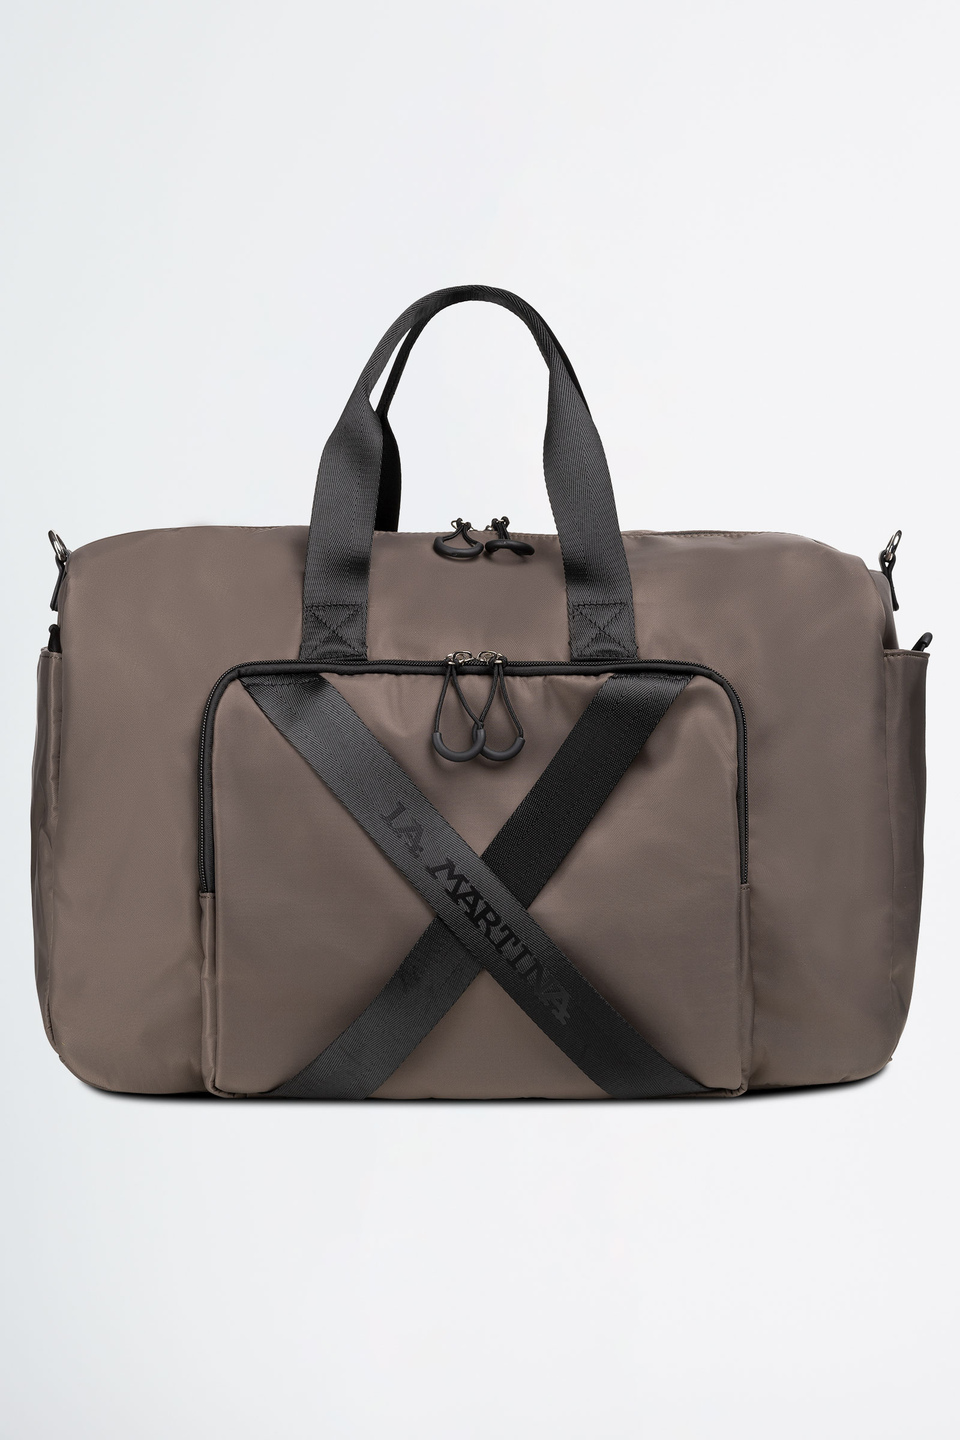 Duffle bag two handles in synthetic fabric | La Martina - Official Online Shop